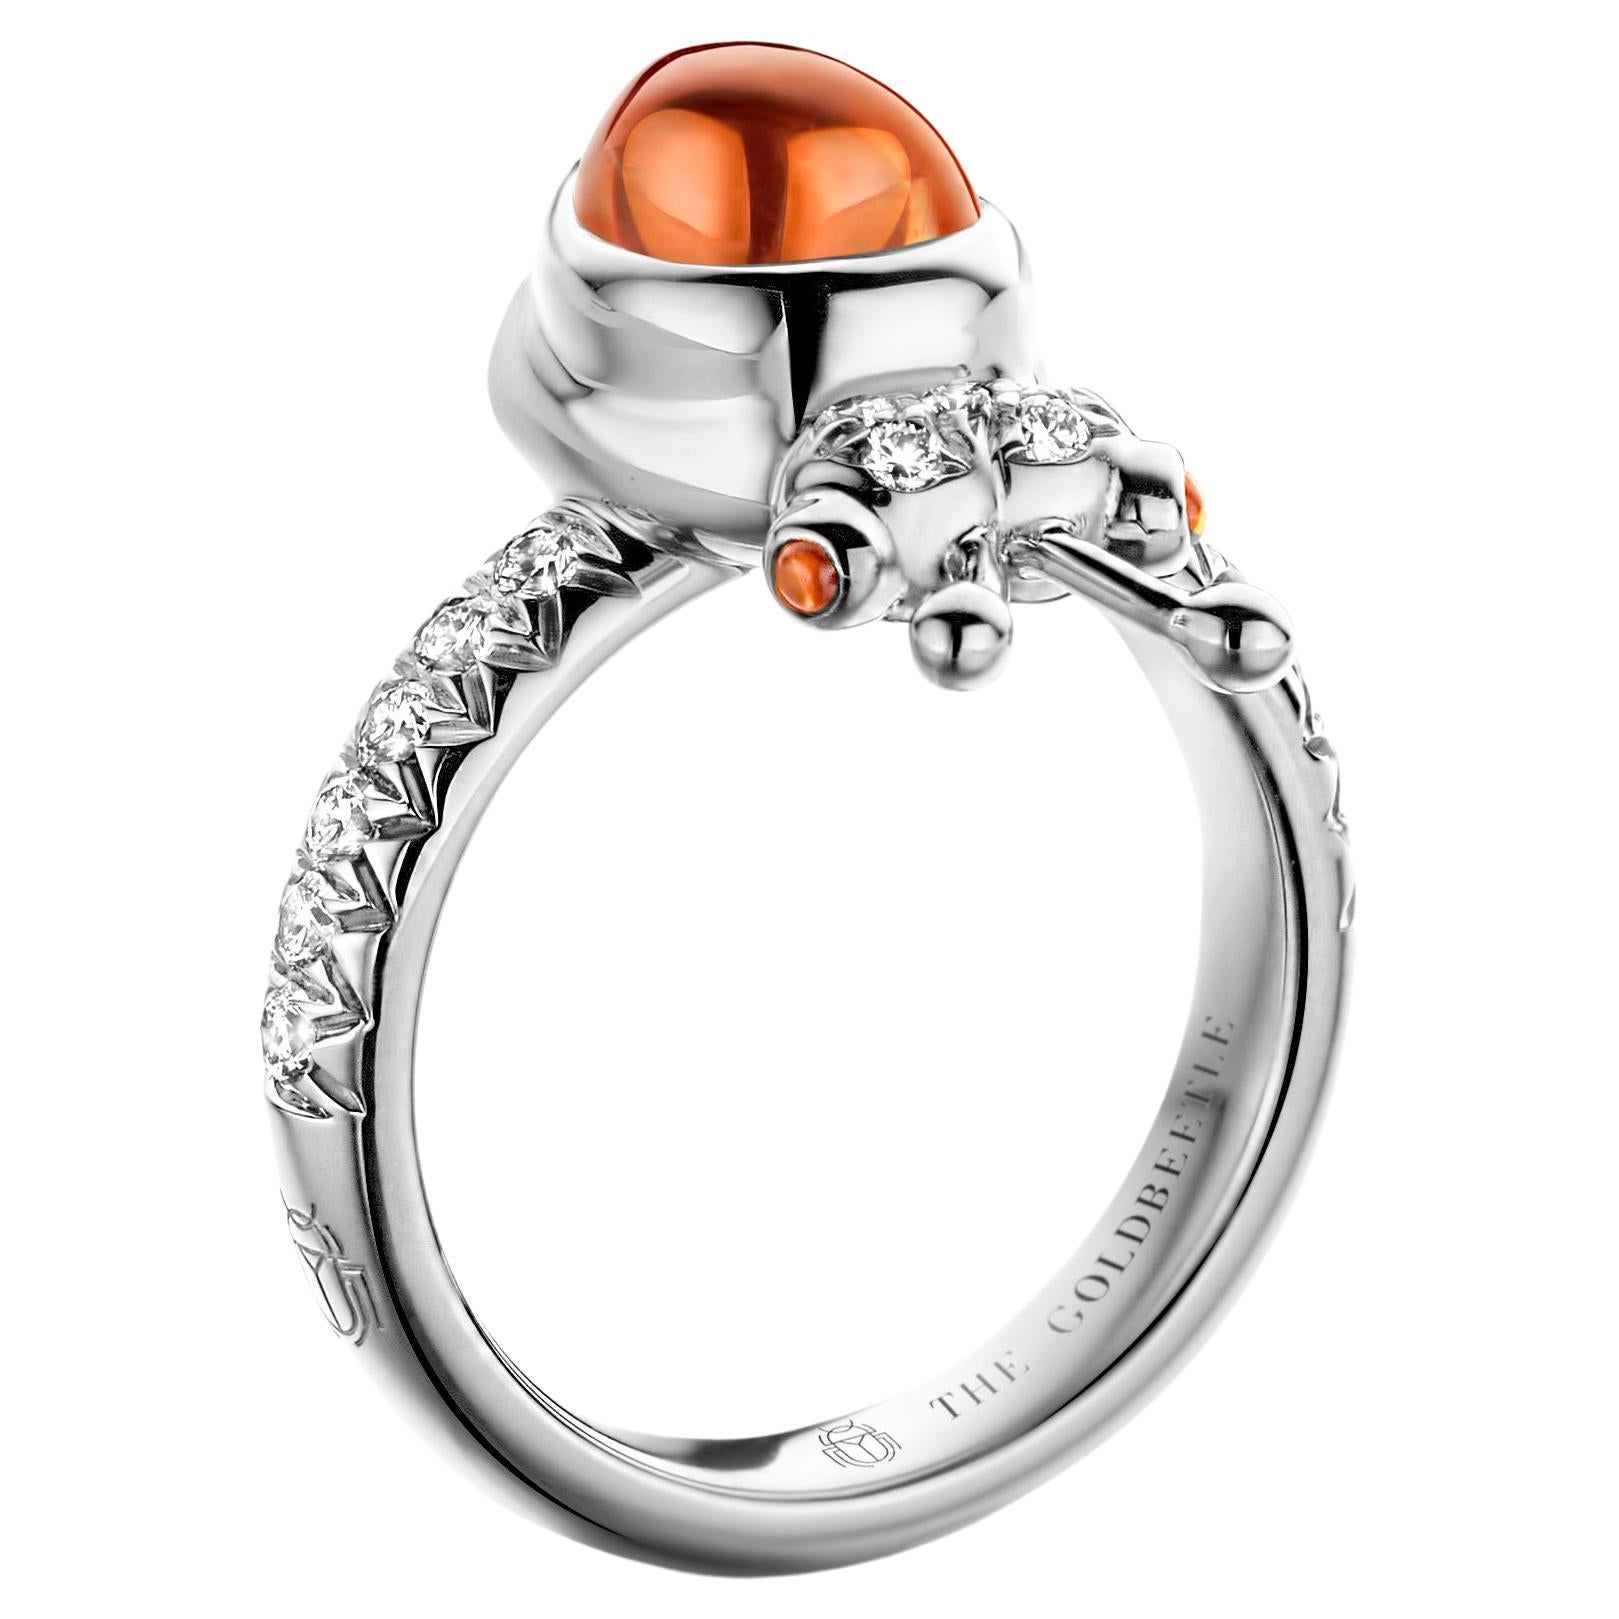 One-of-a-kind lucky beetle ring in 18-karat white gold 8,6 g set with the finest diamonds in brilliant cut 0,34 carat (VVS/DEF quality) one natural, mandarin garnet in pear cabochon cut and two pink tourmalines in round cabochon cut.

Celine